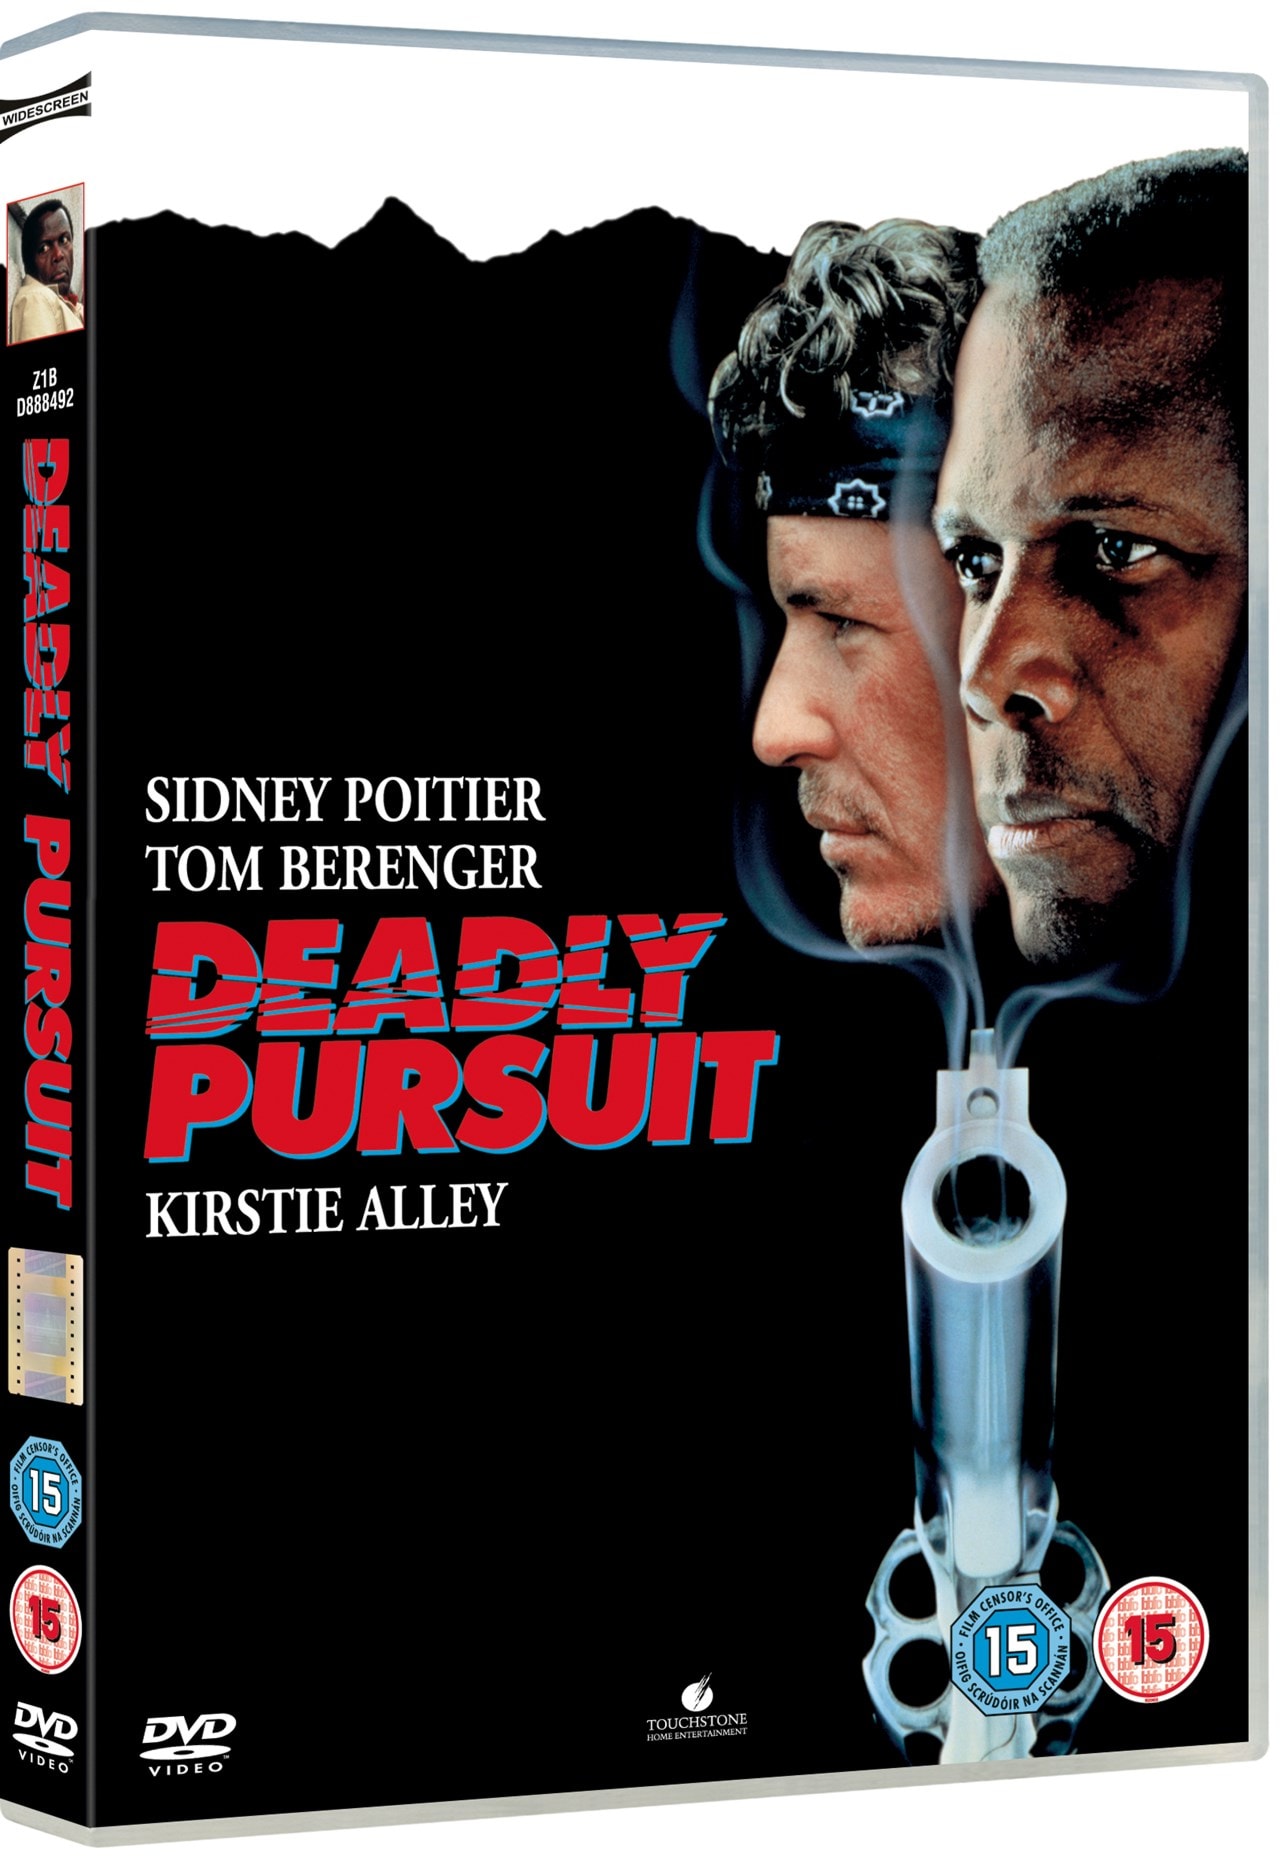 Deadly Pursuit | DVD | Free shipping over £20 | HMV Store